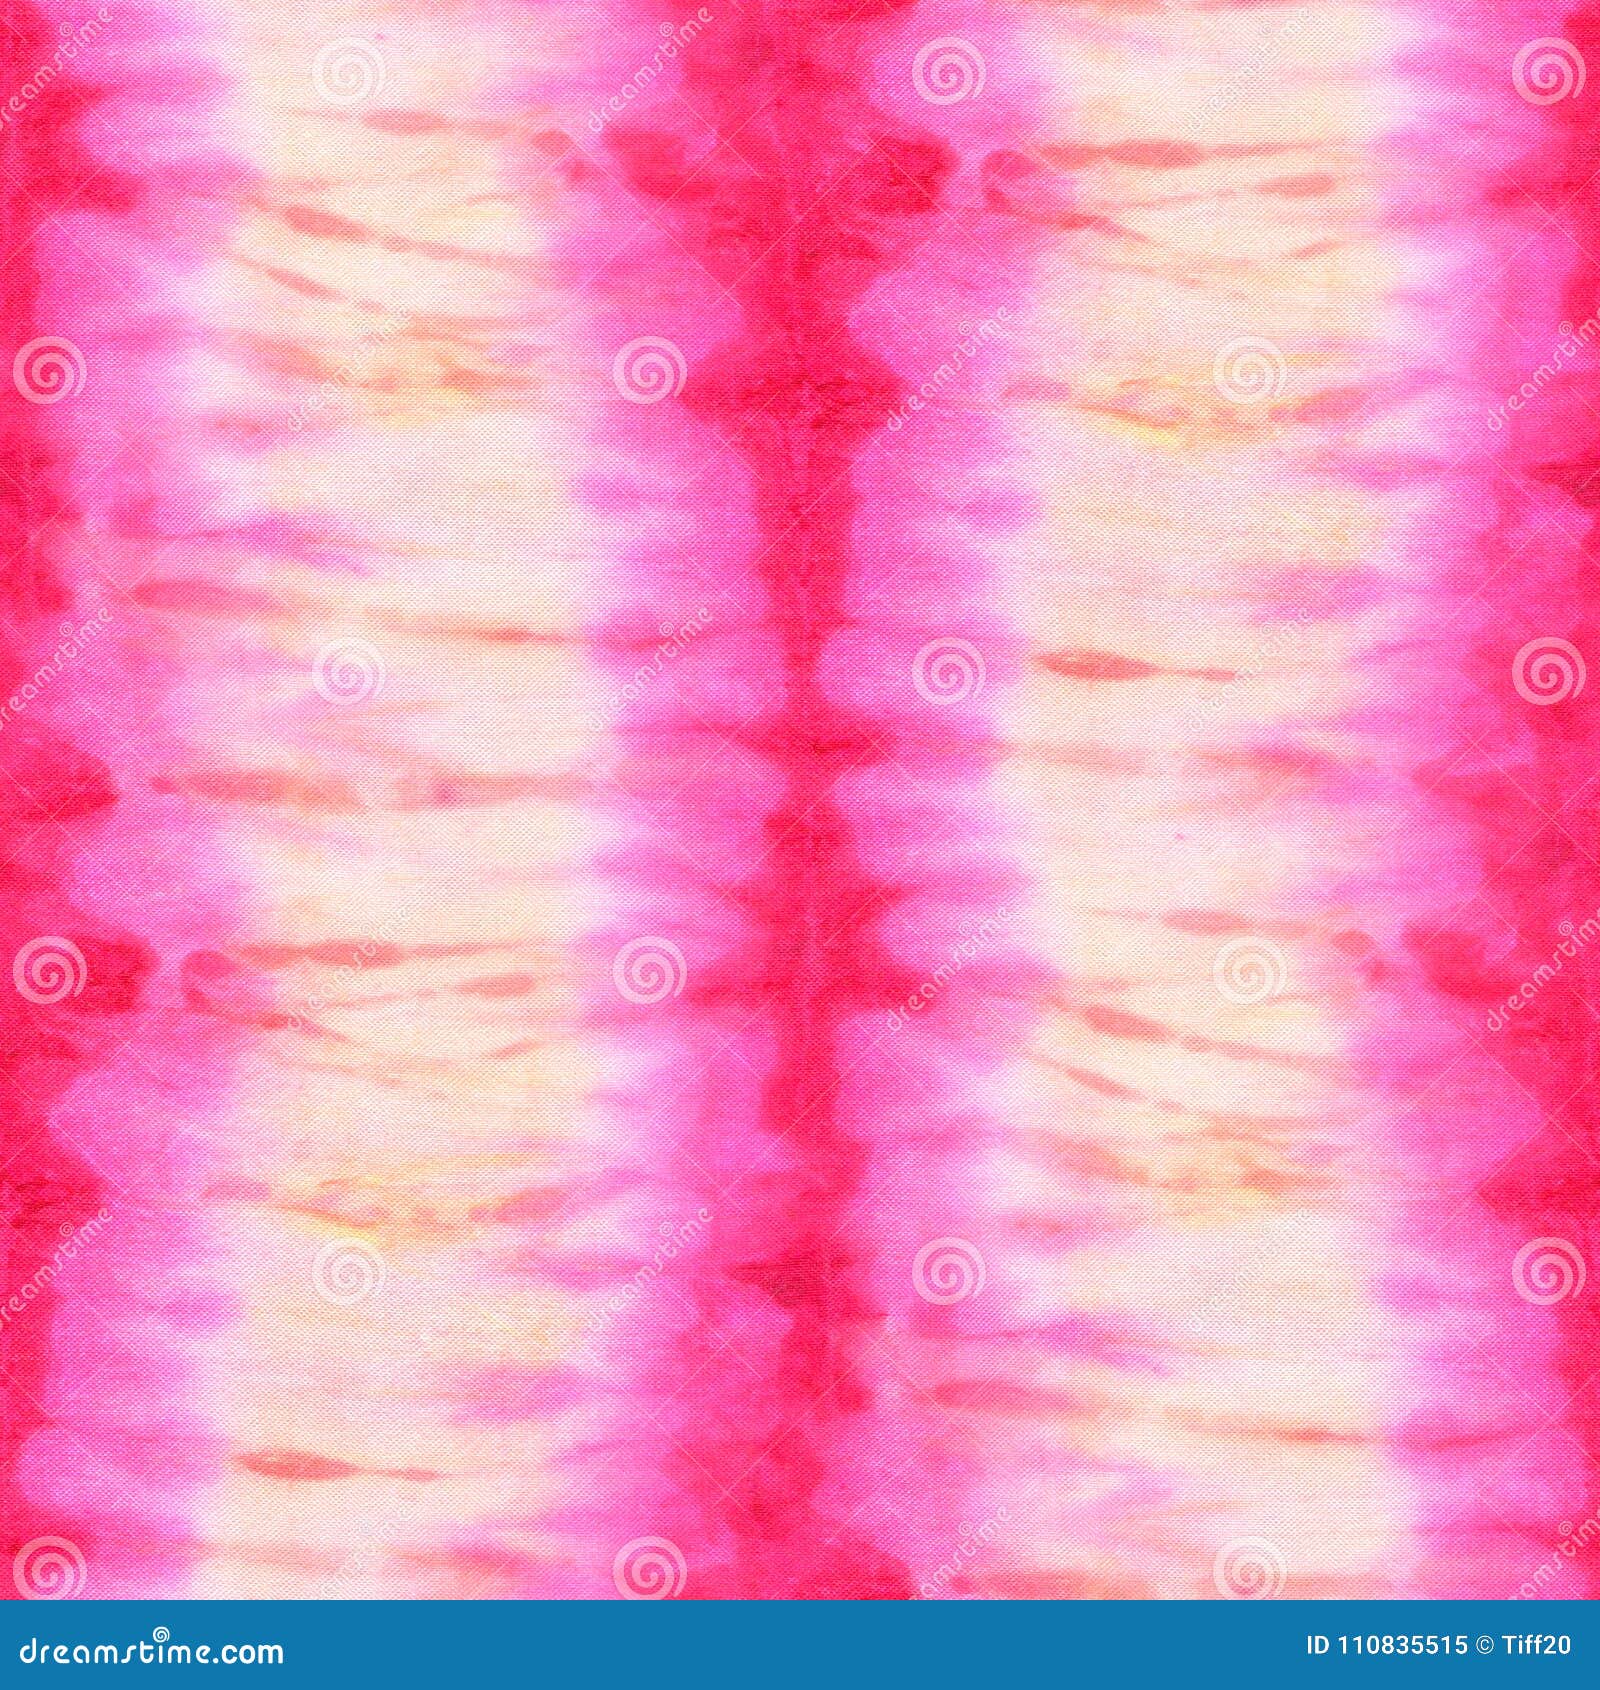 Seamless Tie-dye Pattern of Pink Color on White Silk. Stock ...